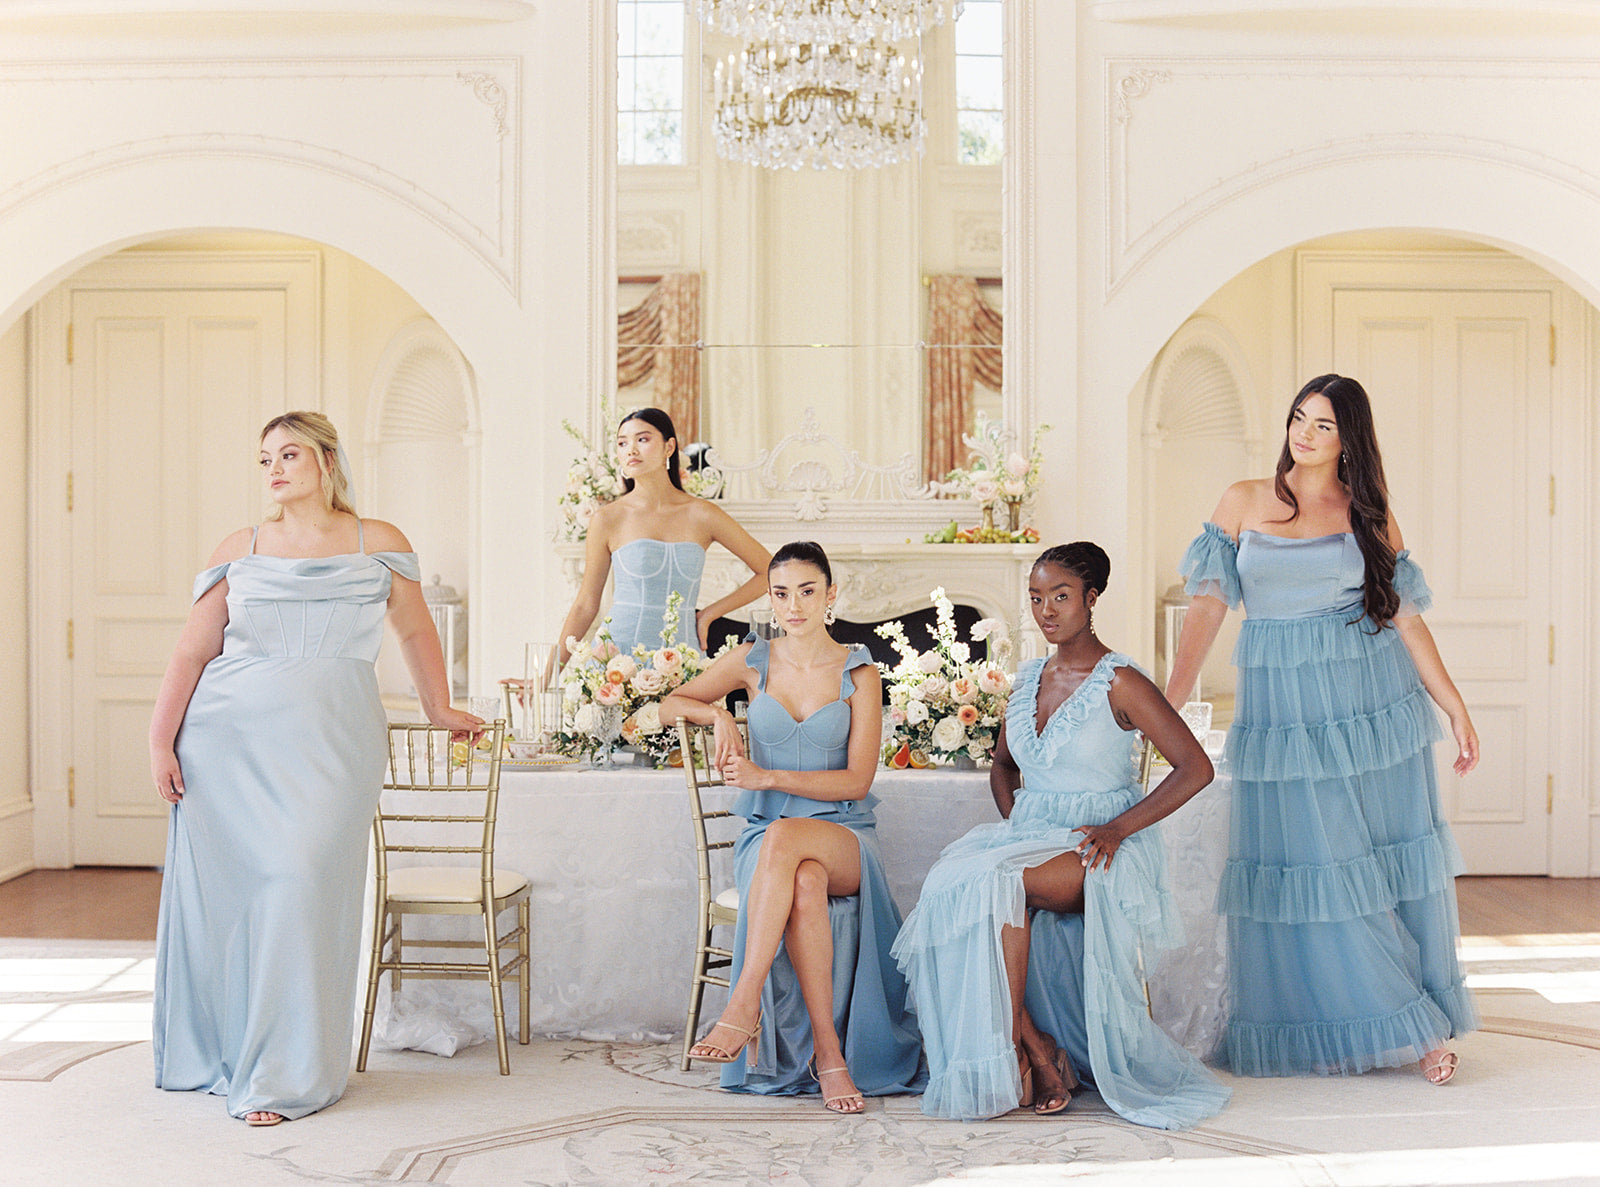 Blue Bridesmaid Dresses: 31 Dresses in All Hues of Blue - hitched.co.uk